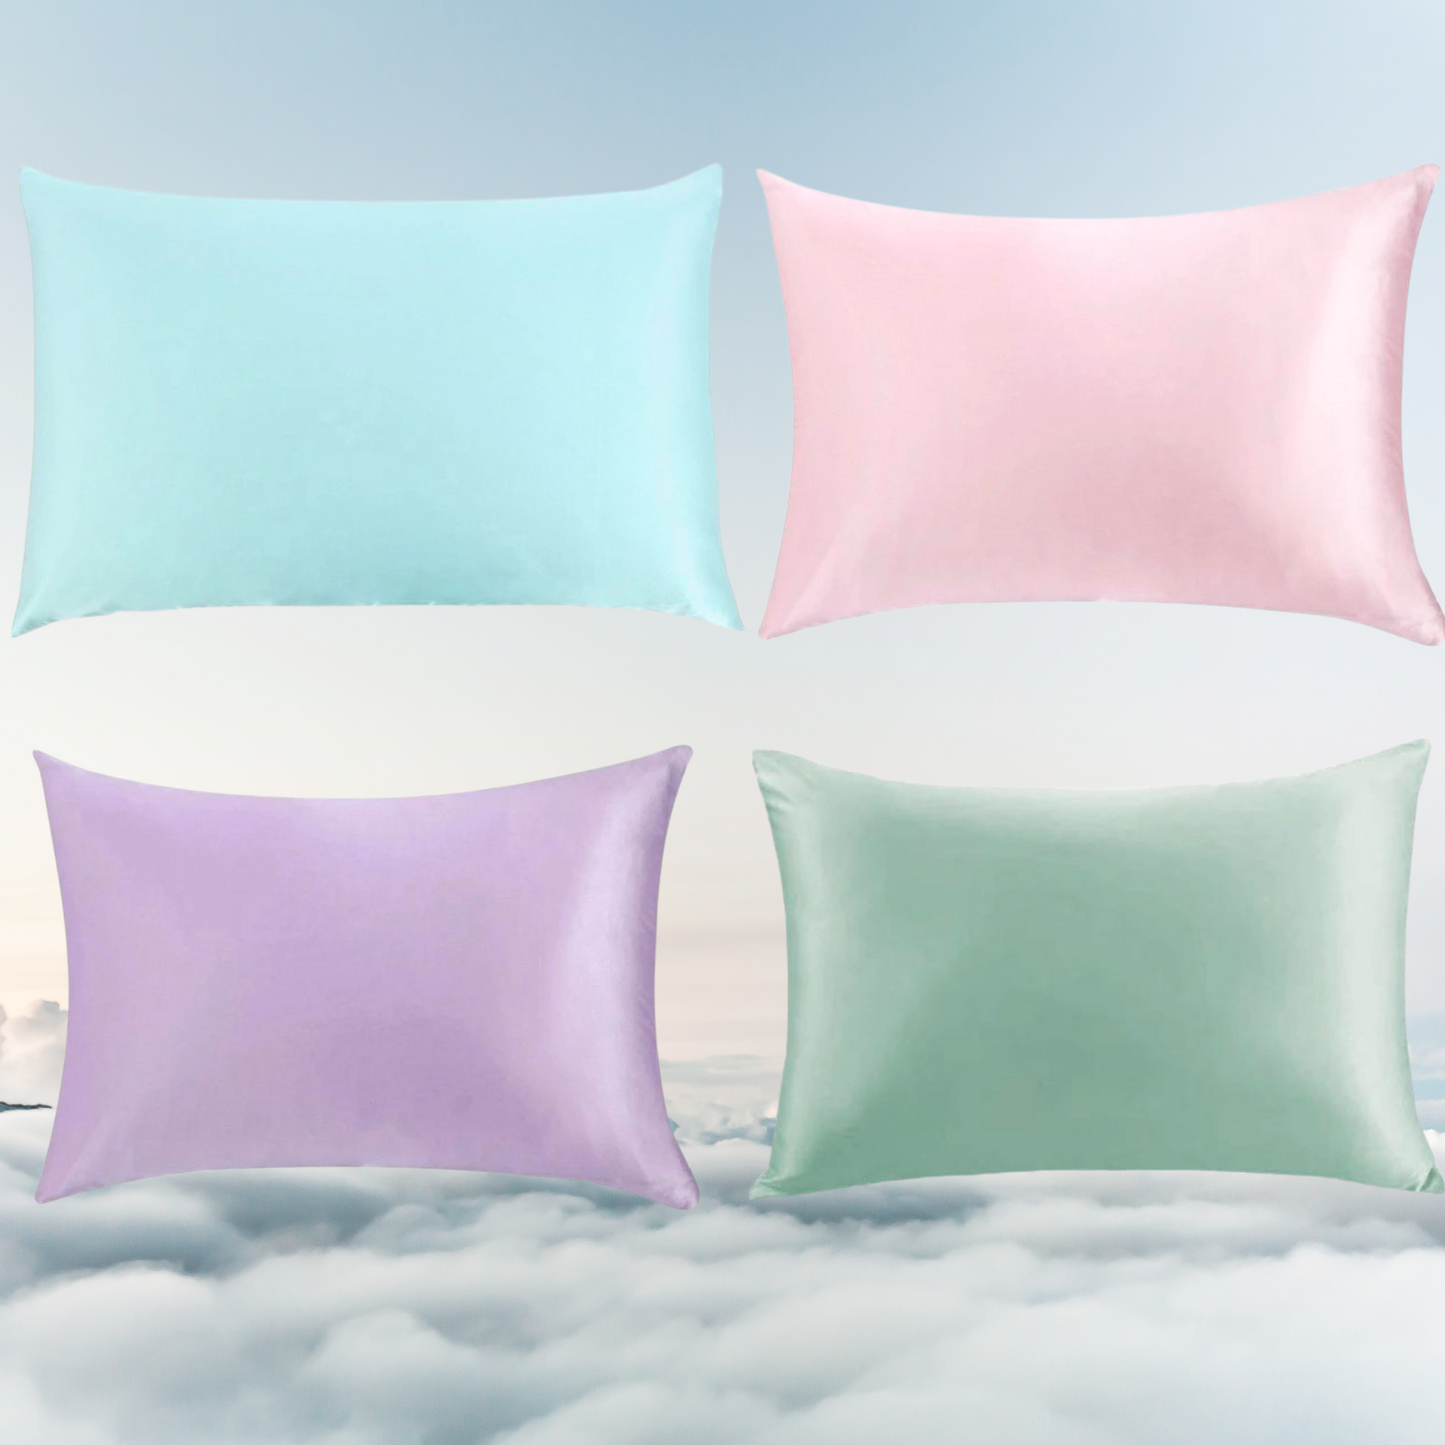 100% mulberry silk pillowcases in aesthetic colours